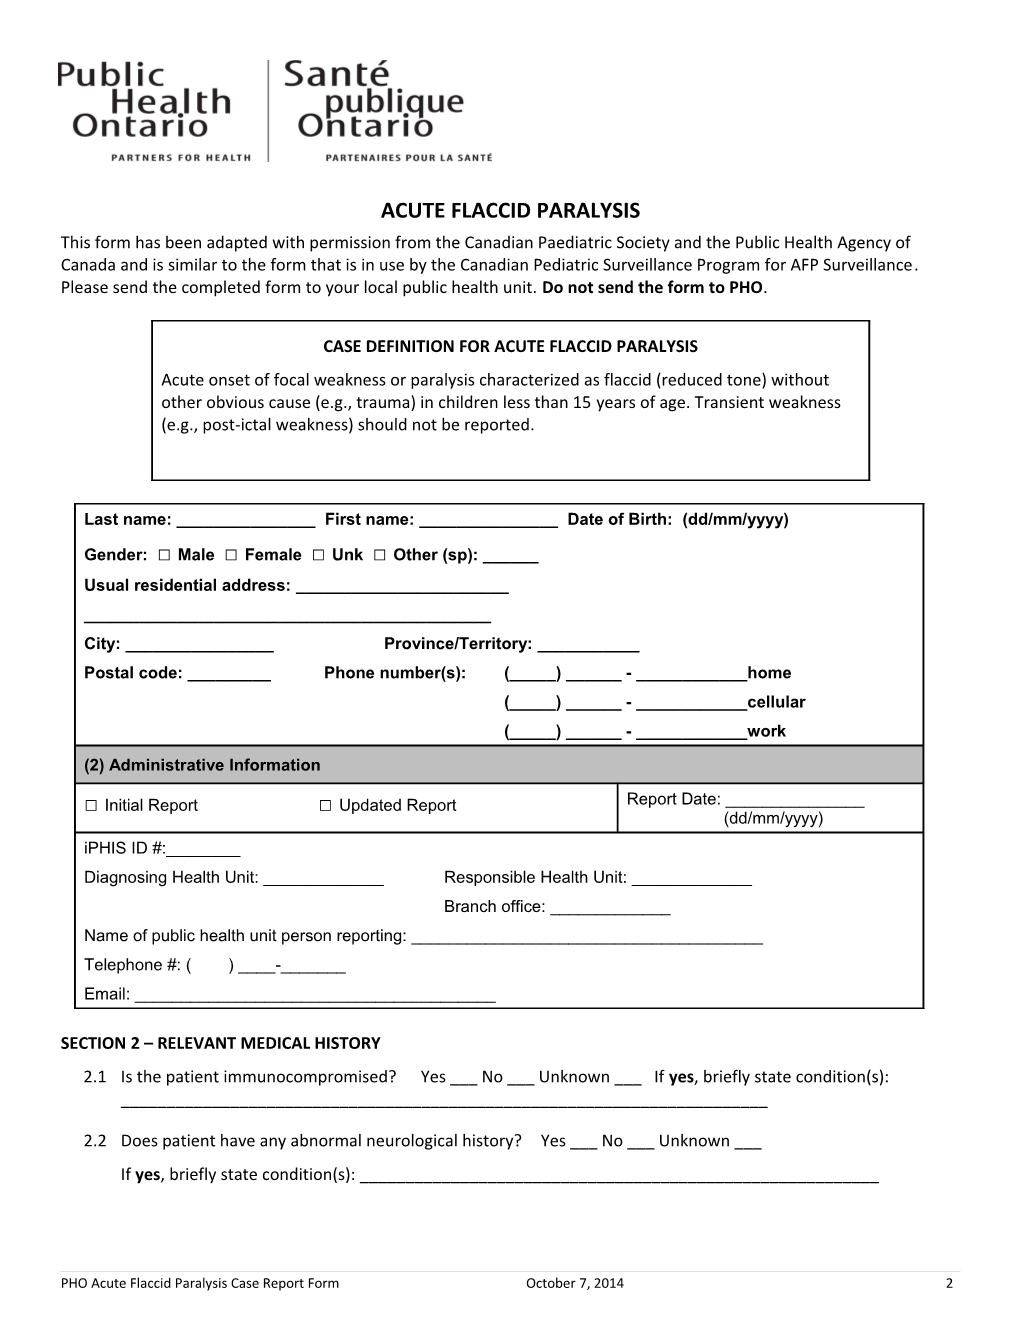 Acute Flaccid Paralyis Case Reporting Form